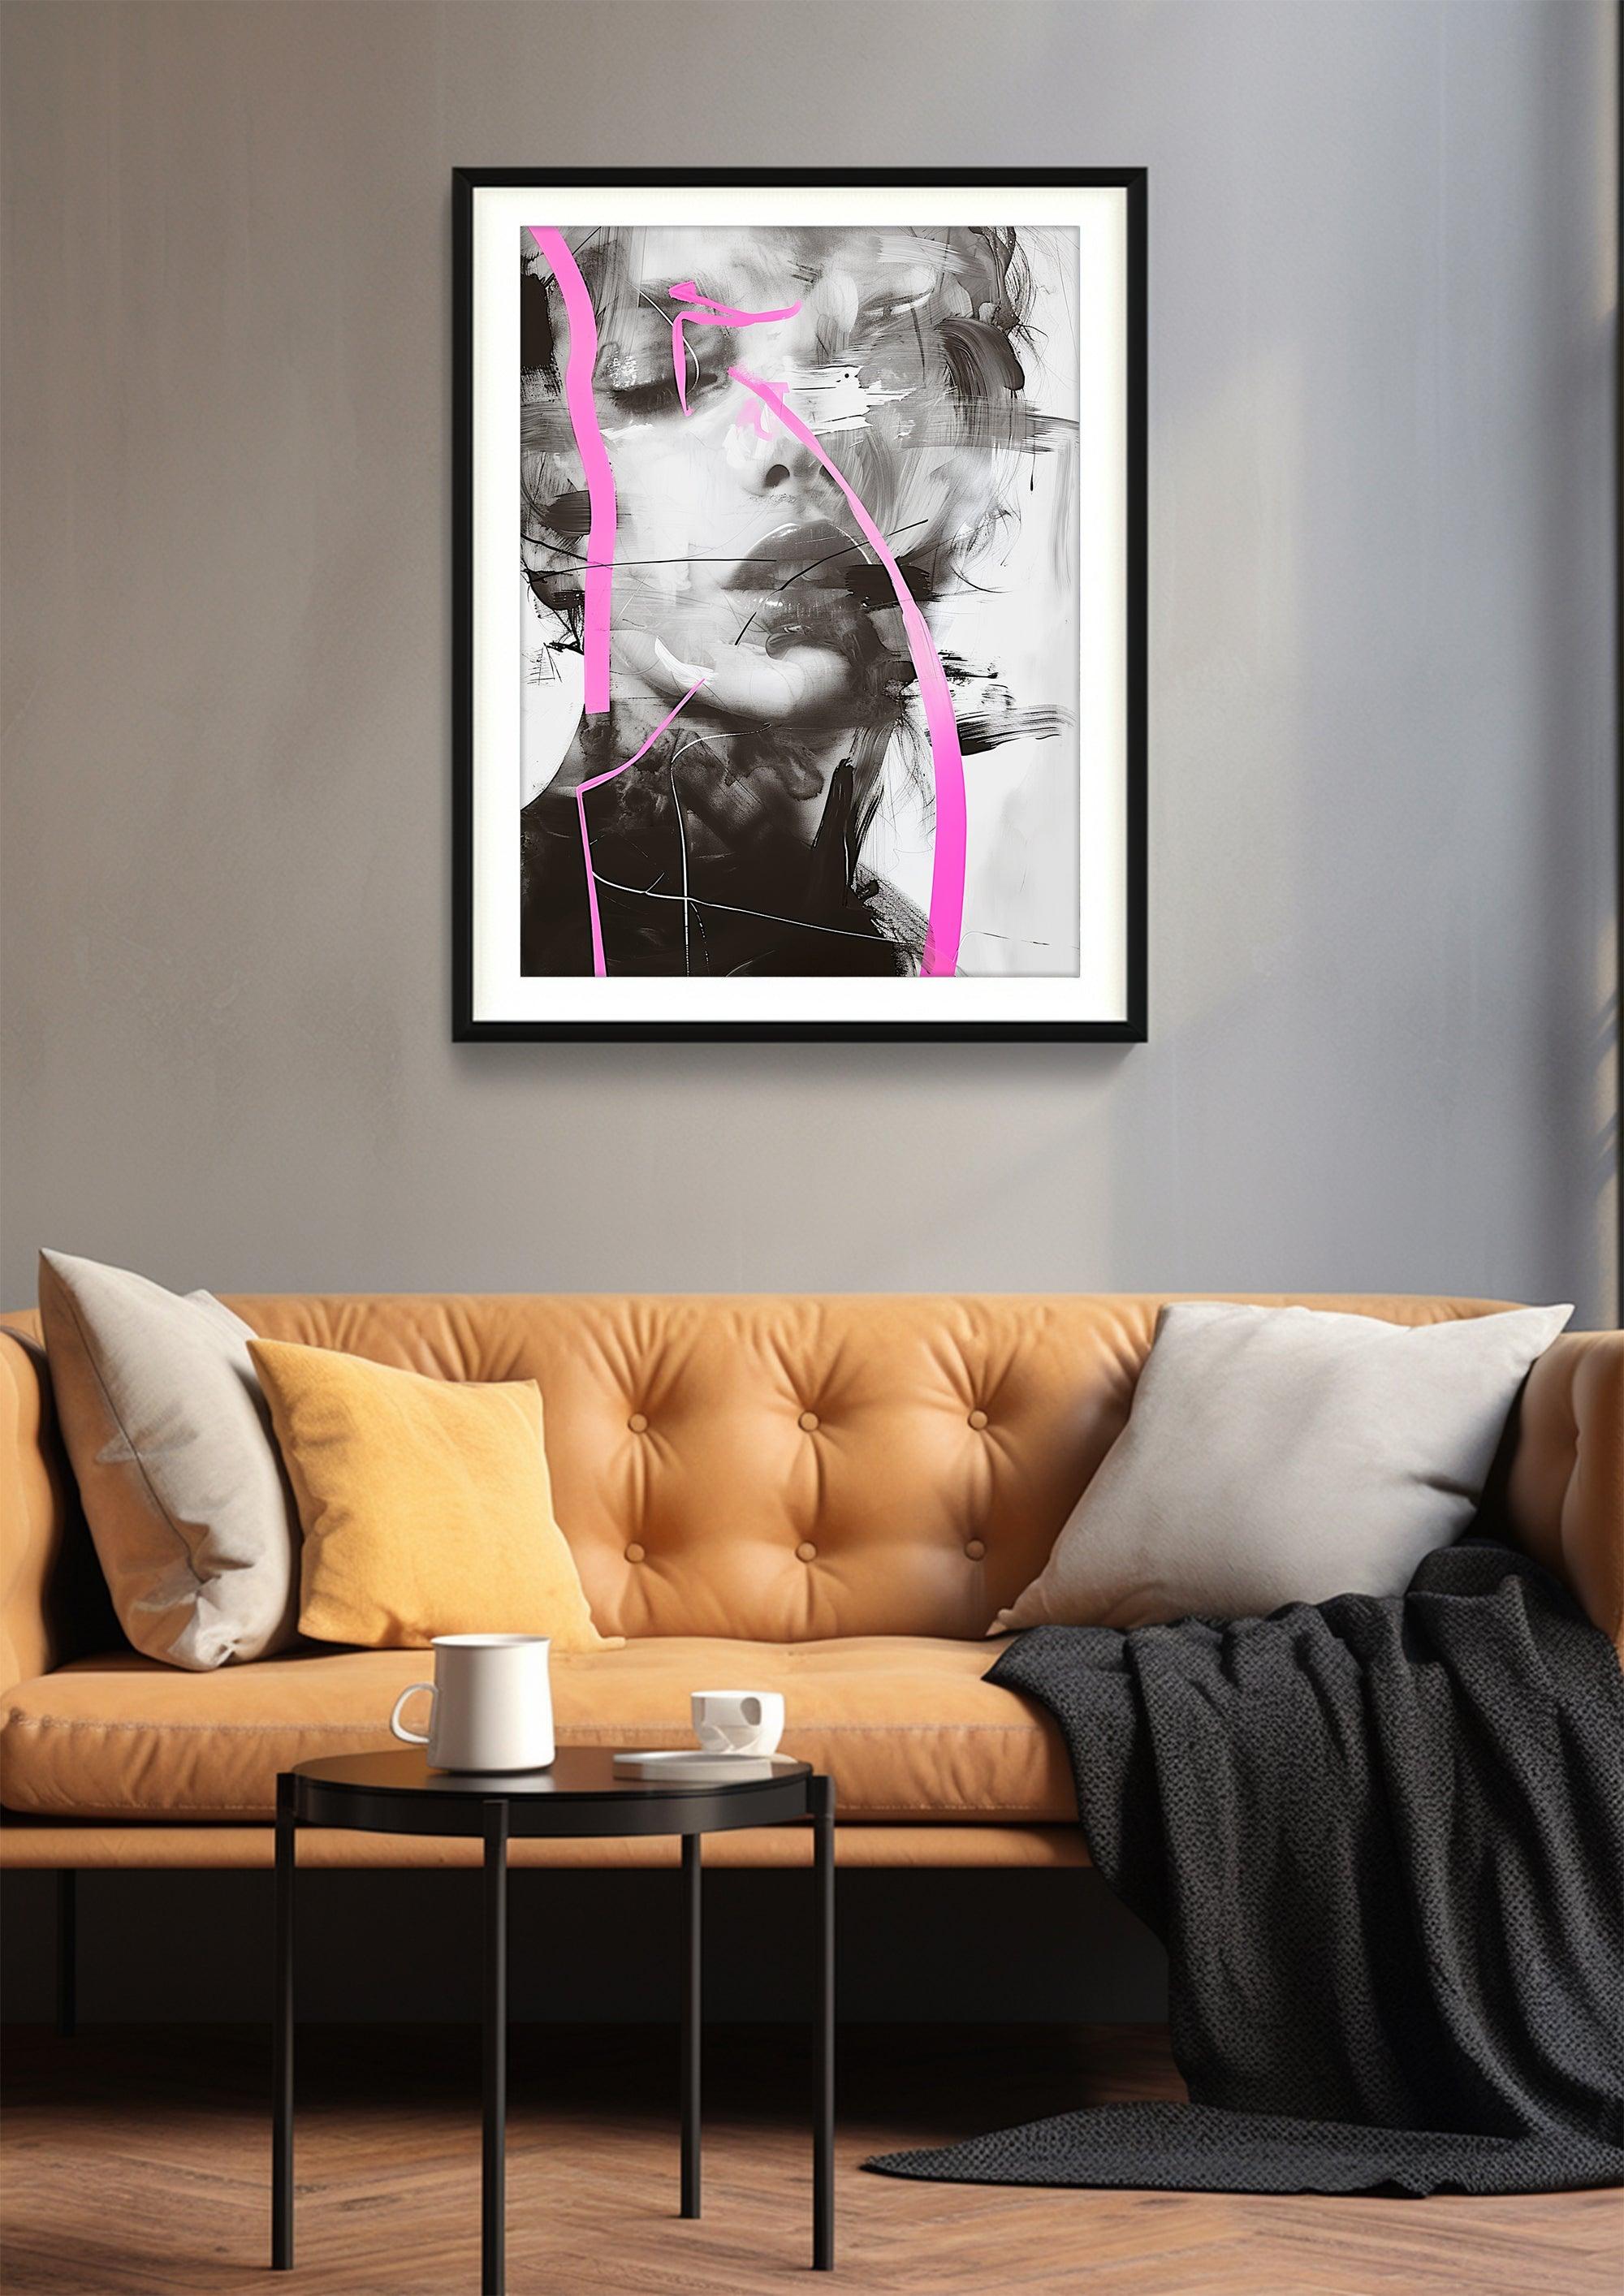 Fashion Forward: Modern Abstract Portrait & Lady Ink Art - Framed Poster Prints for Chic Home Decor